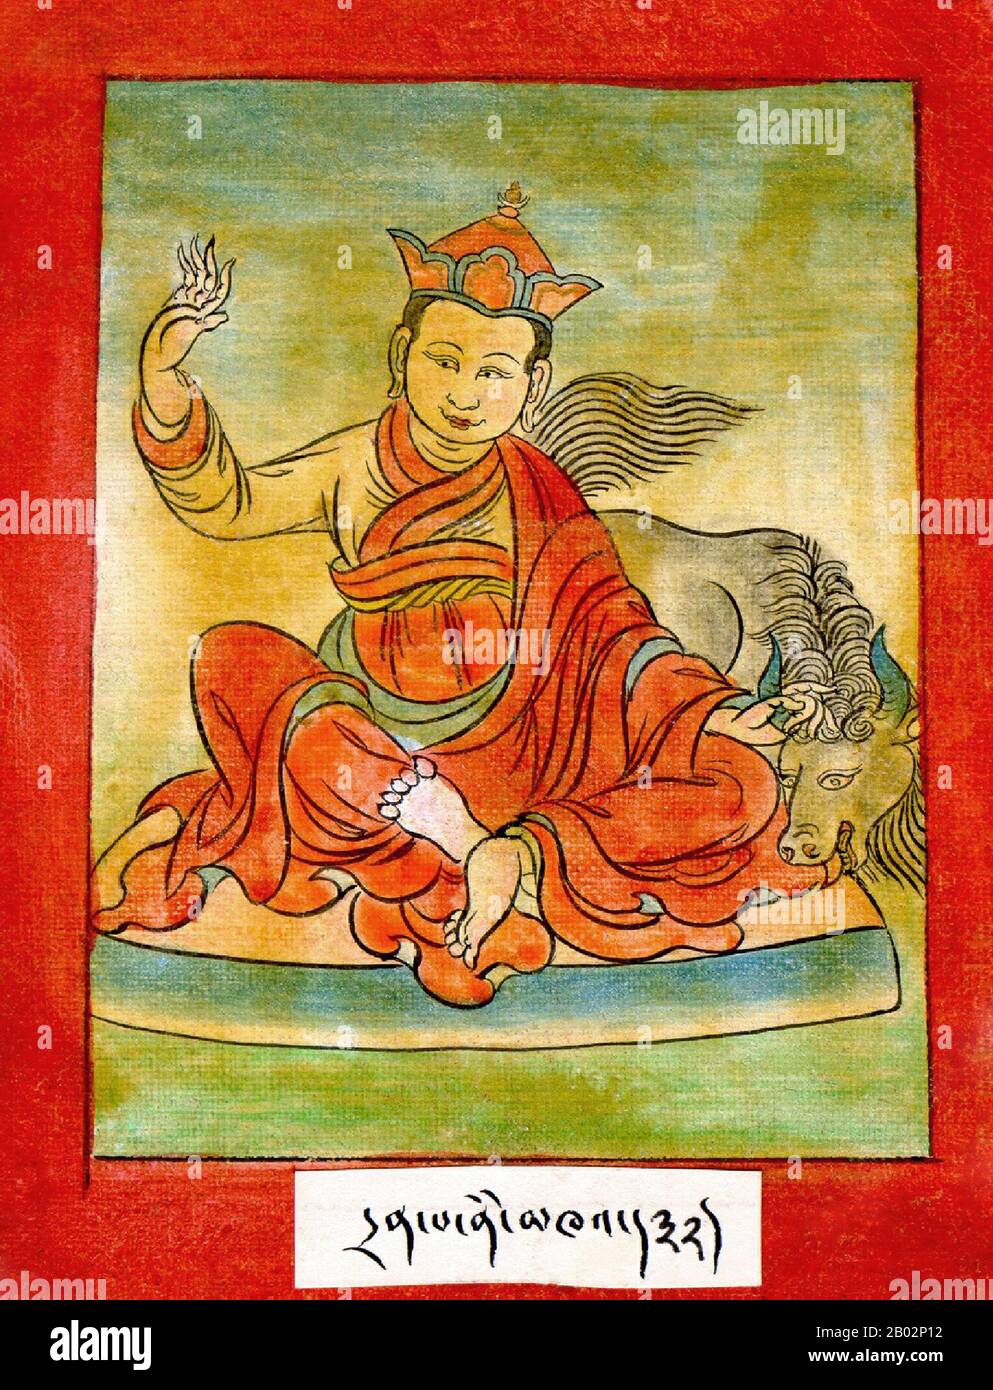 Drenpa Namkha is claimed by both the Buddhist and Bon traditions as an important religious figure. The sources discussing Drenpa Namkha’s life vary widely, even within a single tradition: within Bon sources there is thought to be one master with the name Drenpa Namkha in Zhang Zhung and one in Tibet, though his existence is never questioned. Little can be known for certain.  According to Buddhist sources Drenpa Namkha was initially a Bon master who converted to Buddhism. He later became one of the twenty-five disciples of Padmasambhava, and is said to have gained the yogic power of being able Stock Photo